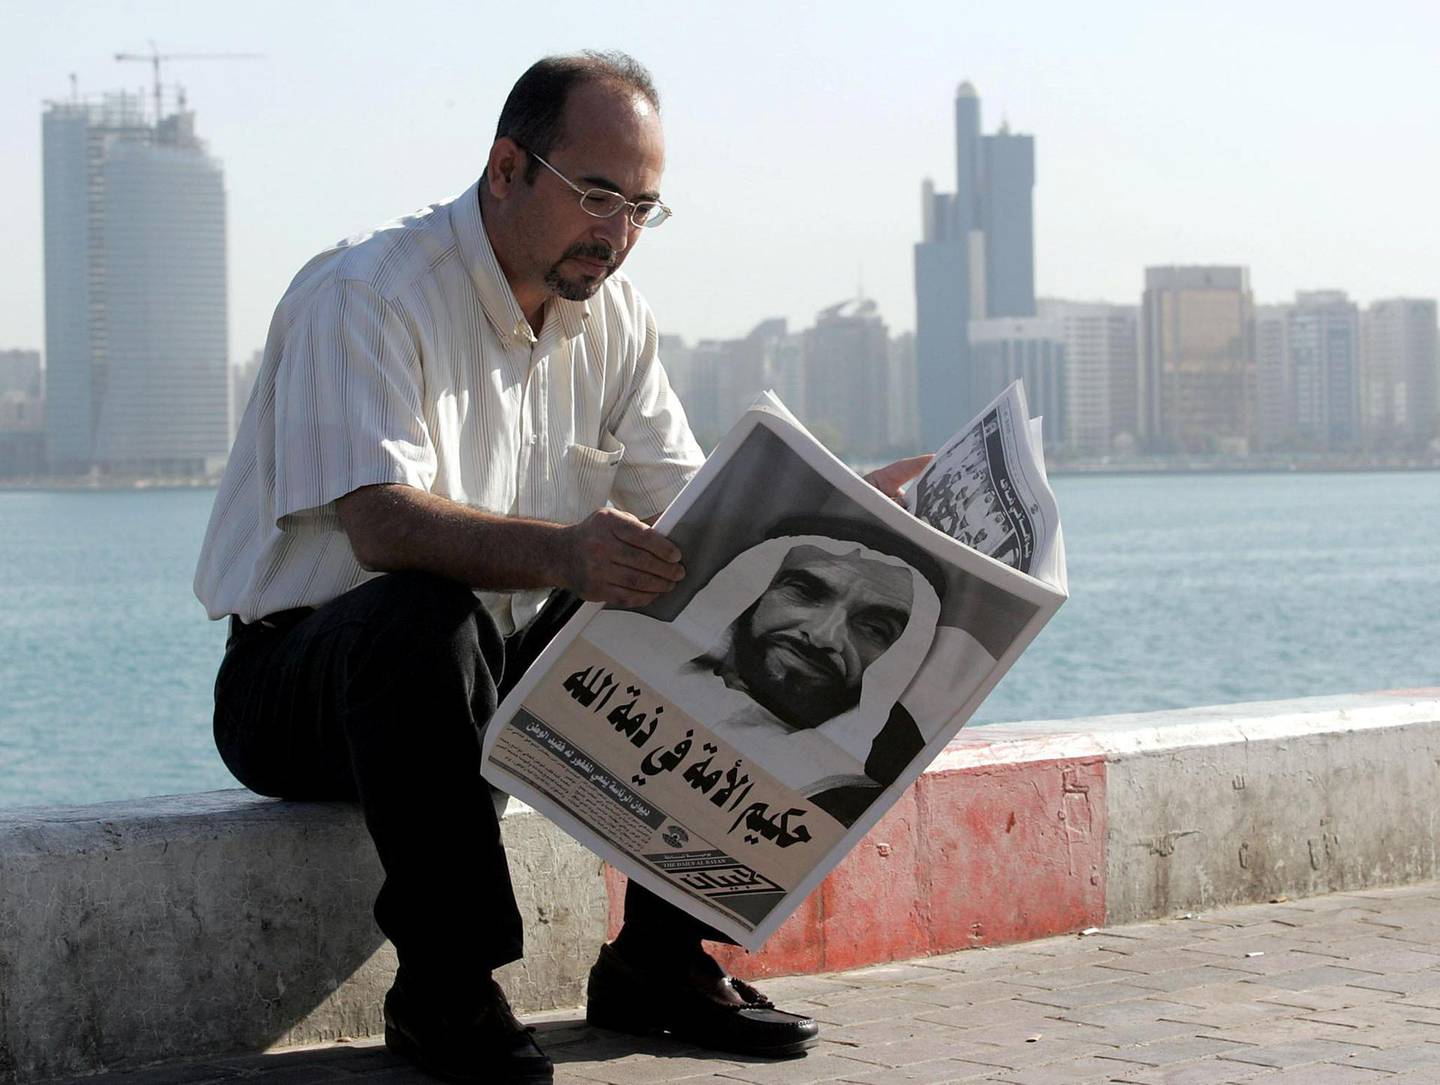 A man reads the newspapers with Sheikh Zayed bin Sultan al-Nahayan's portrait covering the whole front page during the funeral procession of the United Arab Emirate's late president in Abdu Dhabi 03 November 2004. Nahayan, the founding father of the Gulf emirates federation, died 02 November 2004 after more than 30 years at the helm of his oil-rich country.     AFP PHOTO/RABIH MOGHRABI / AFP PHOTO / RABIH MOGHRABI